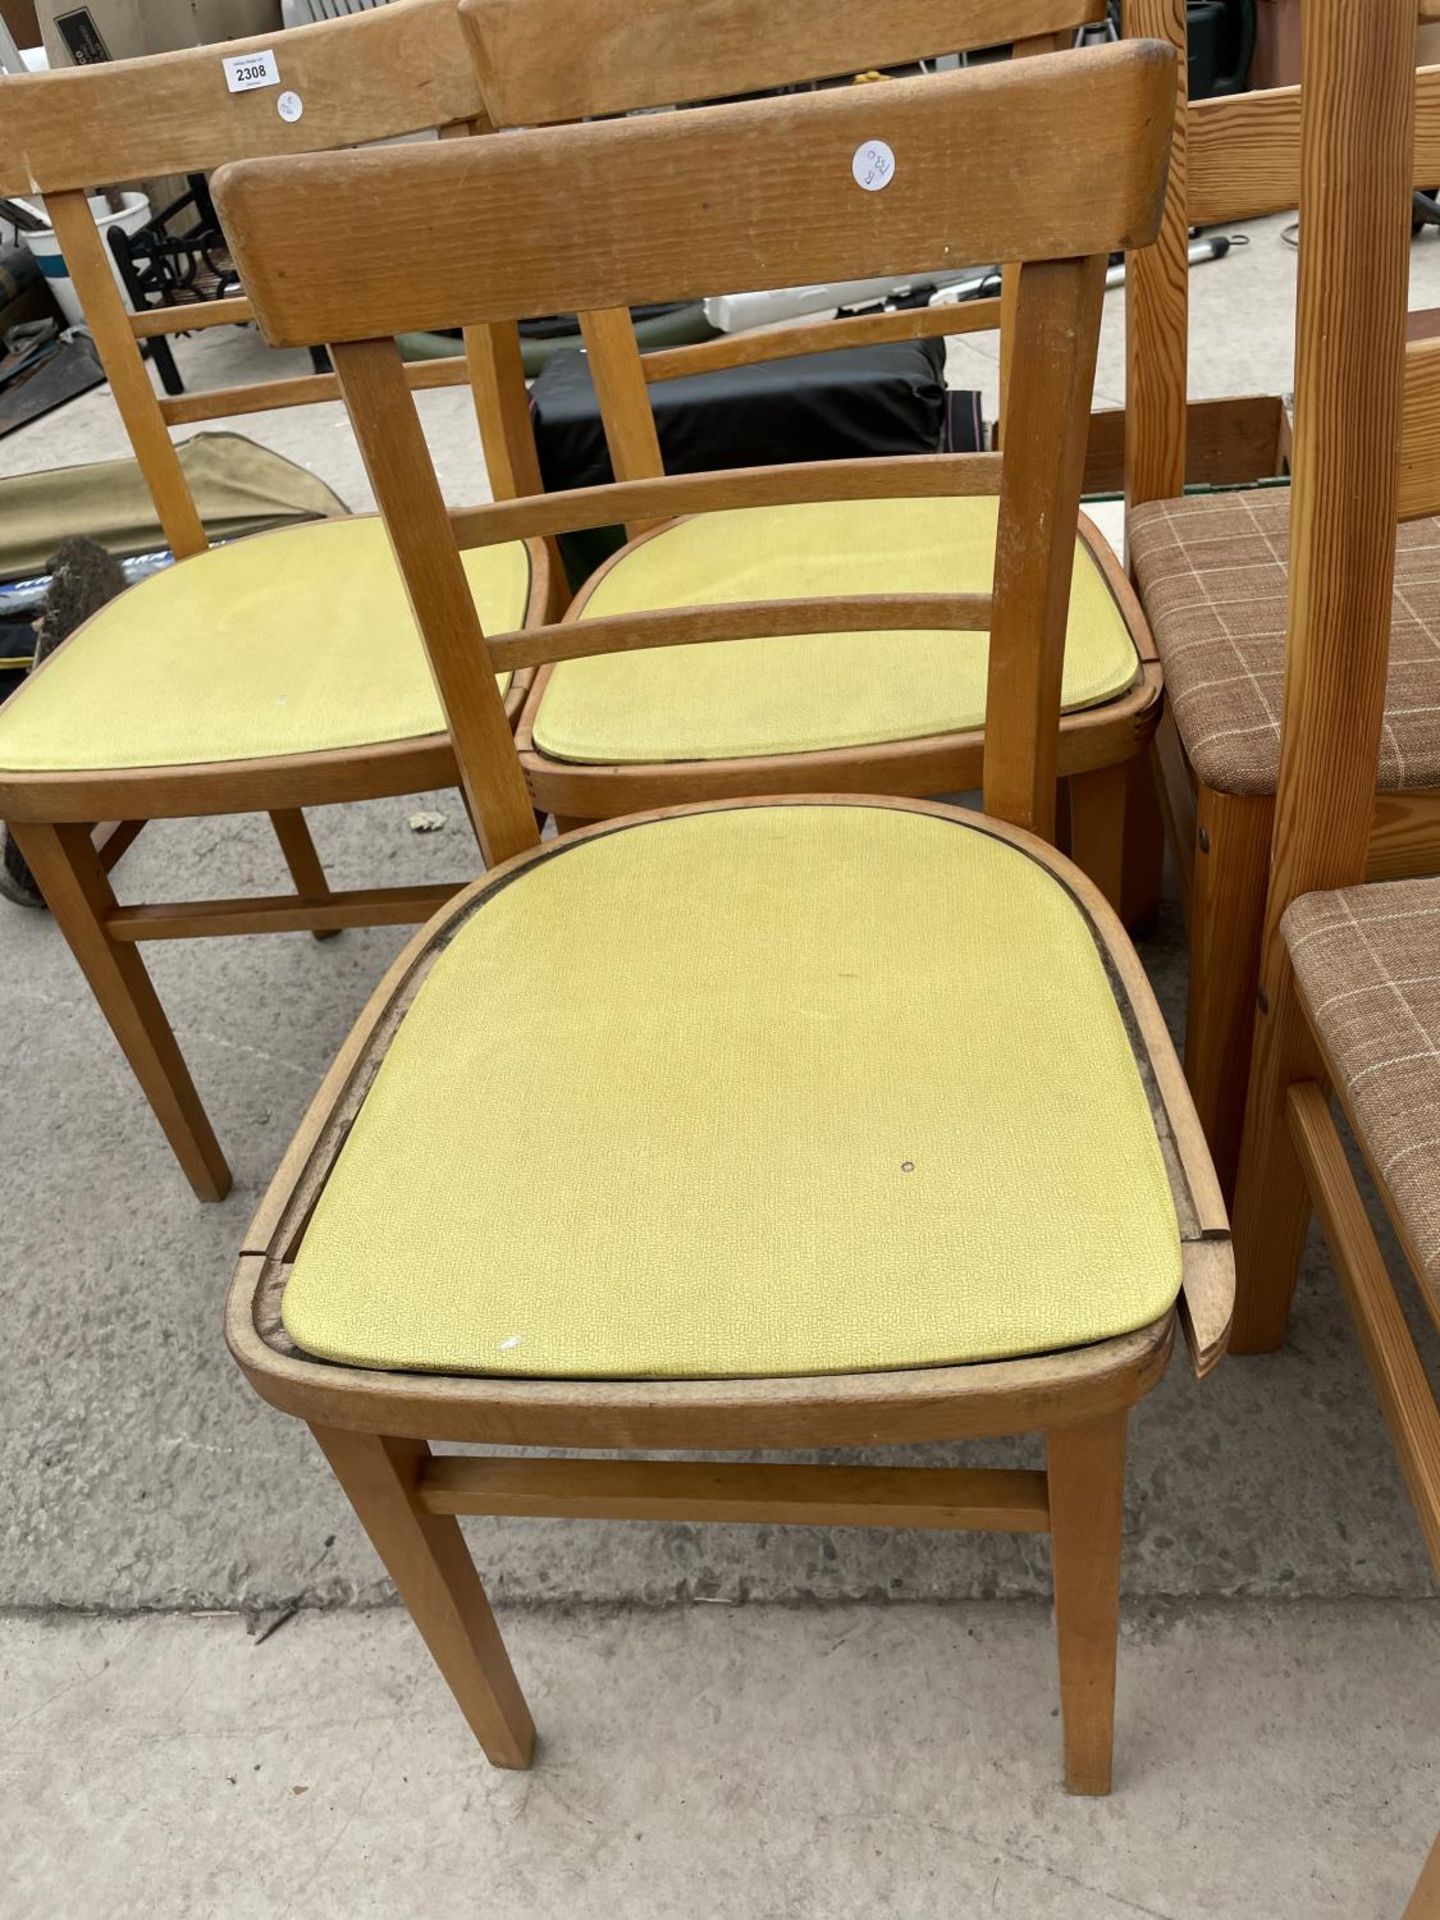 THREE MID 20TH CENTURY KITCHEN CHAIRS AND A STOOL - Image 3 of 4